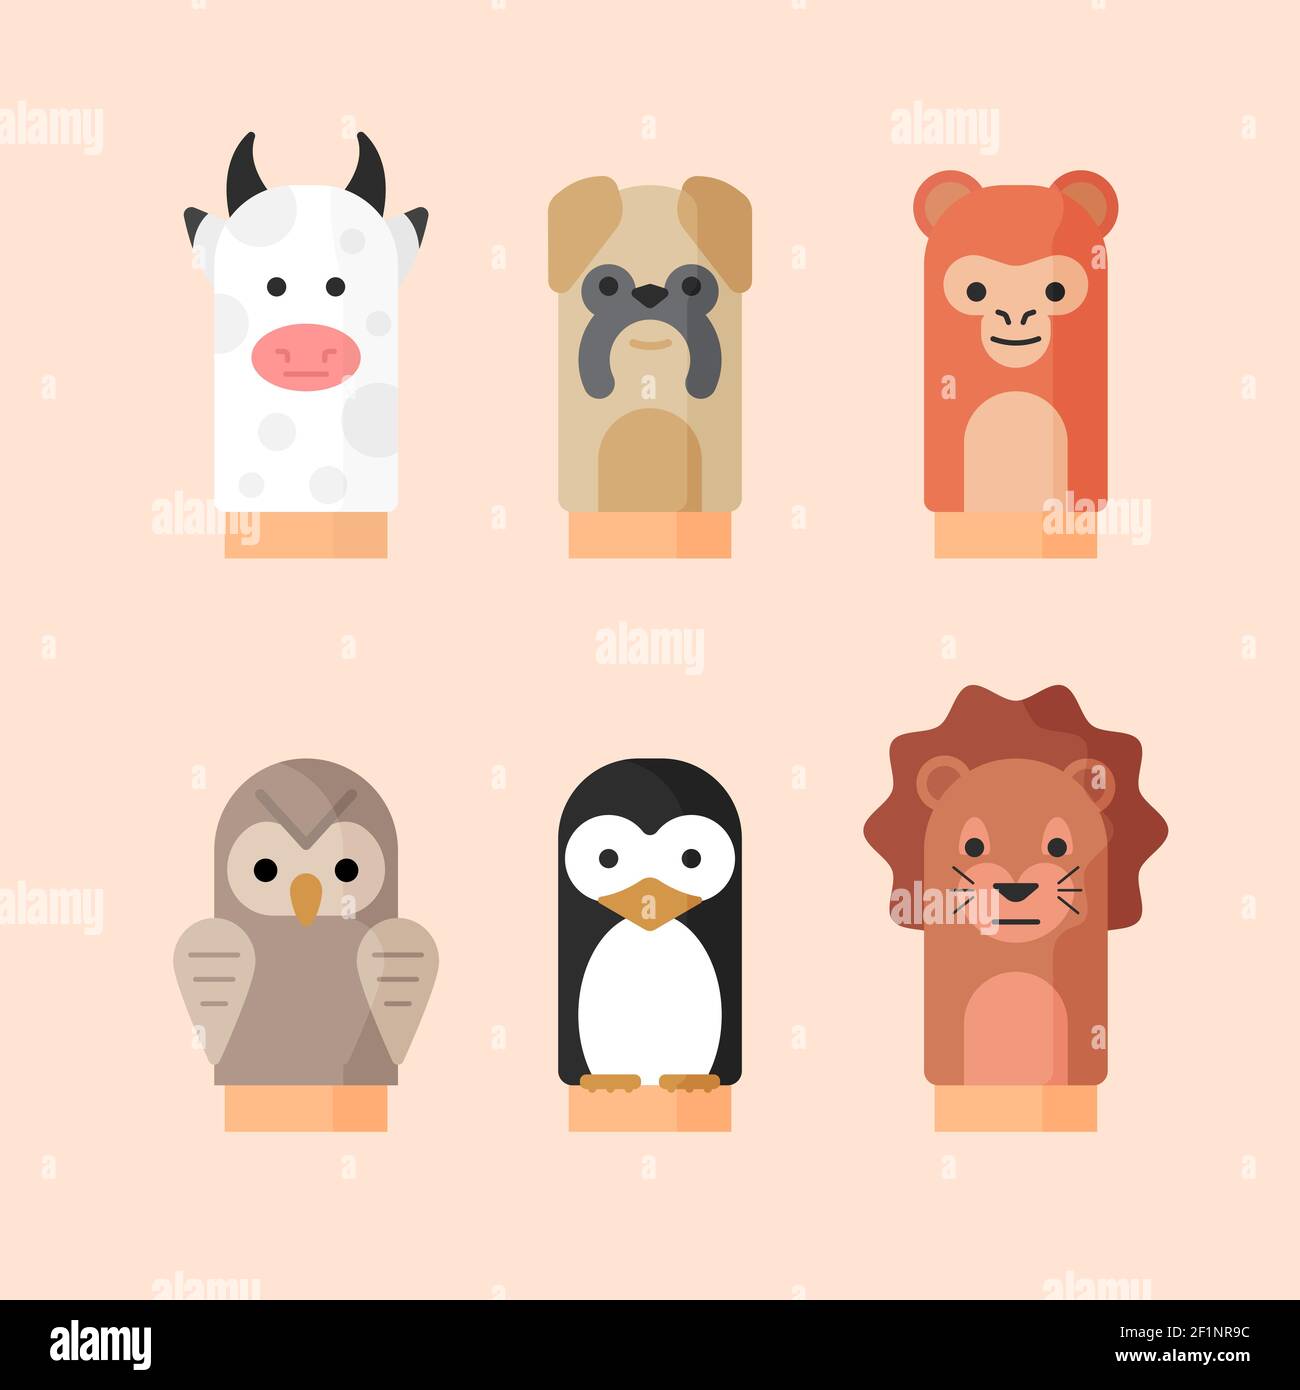 Organic flat design hand puppets collection Vector illustration. Stock Vector